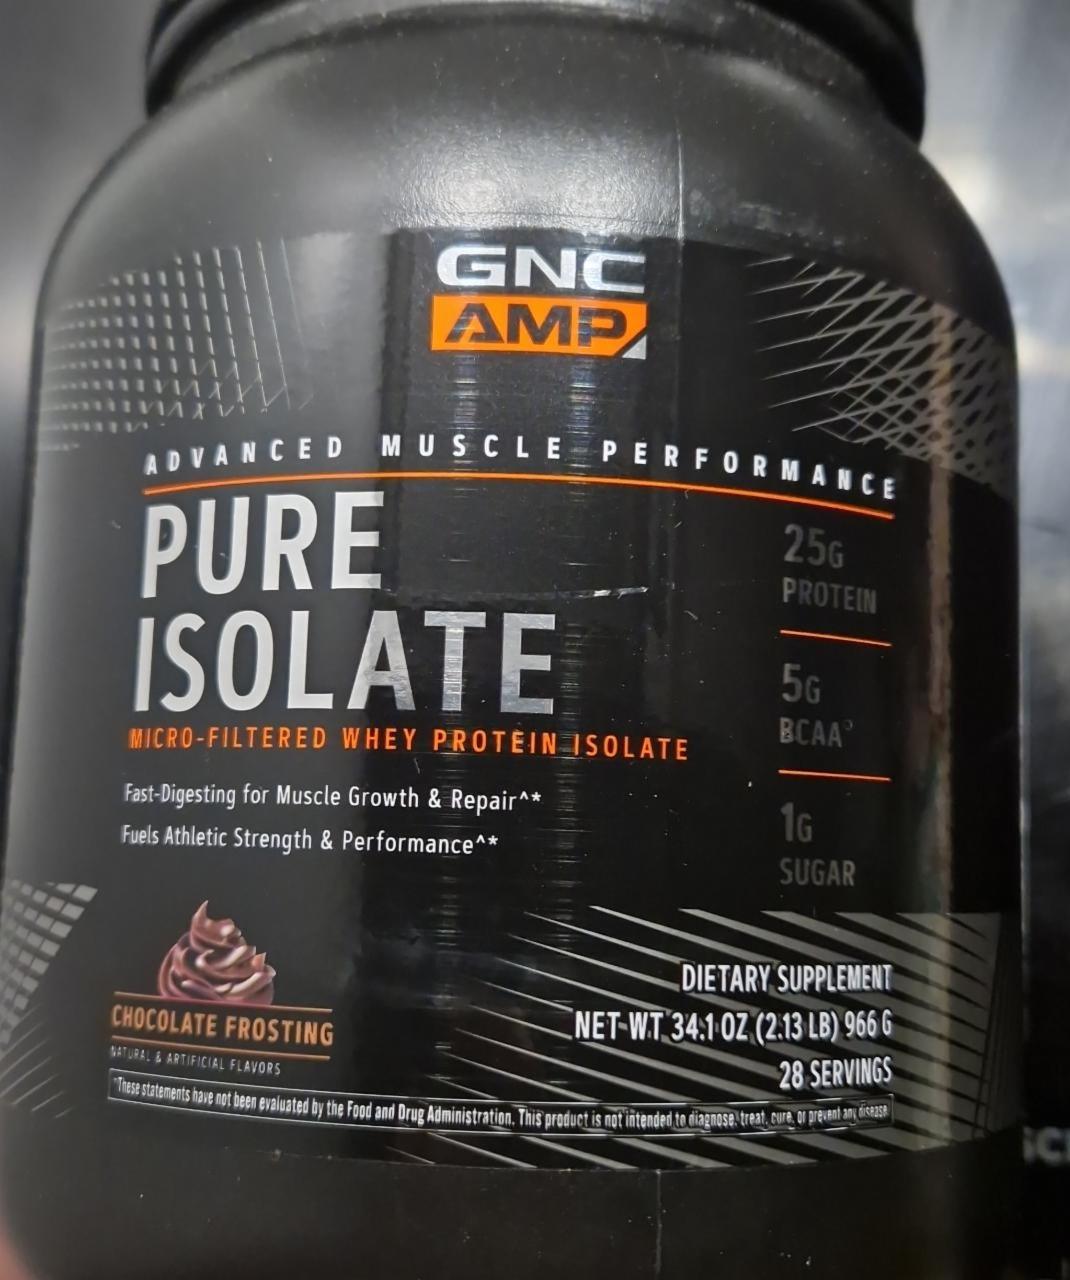 Fotografie - Pure Isolate Whey Protein Chocolate Frosting GNC AMP